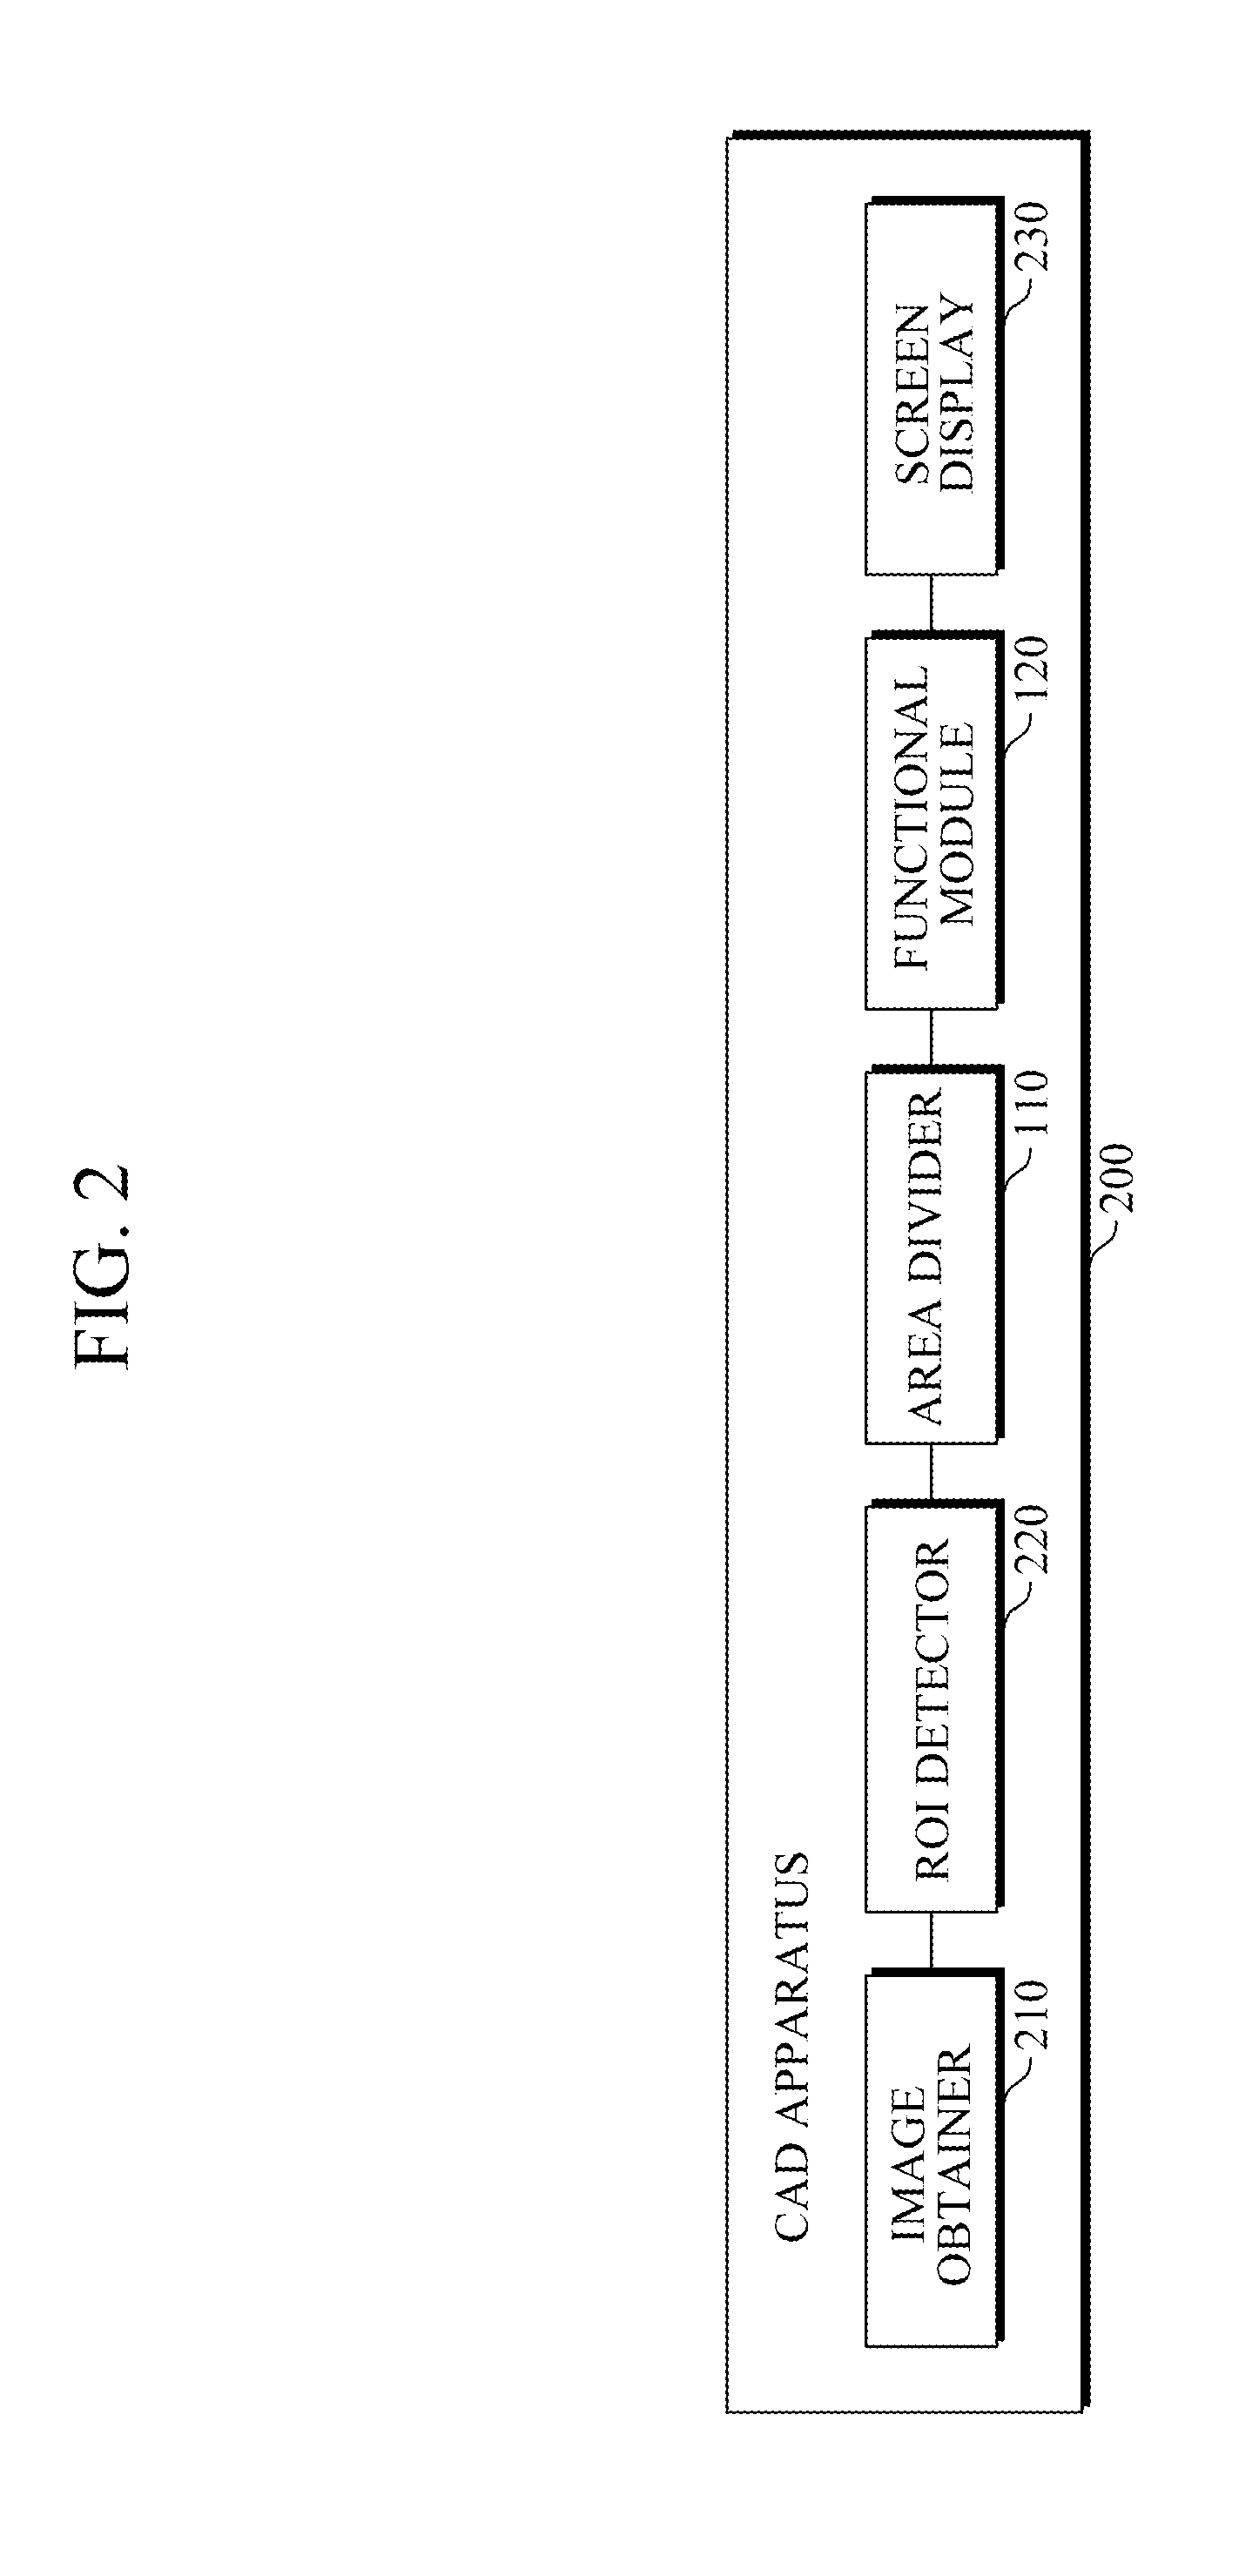 Computer-aided diagnosis apparatus and method